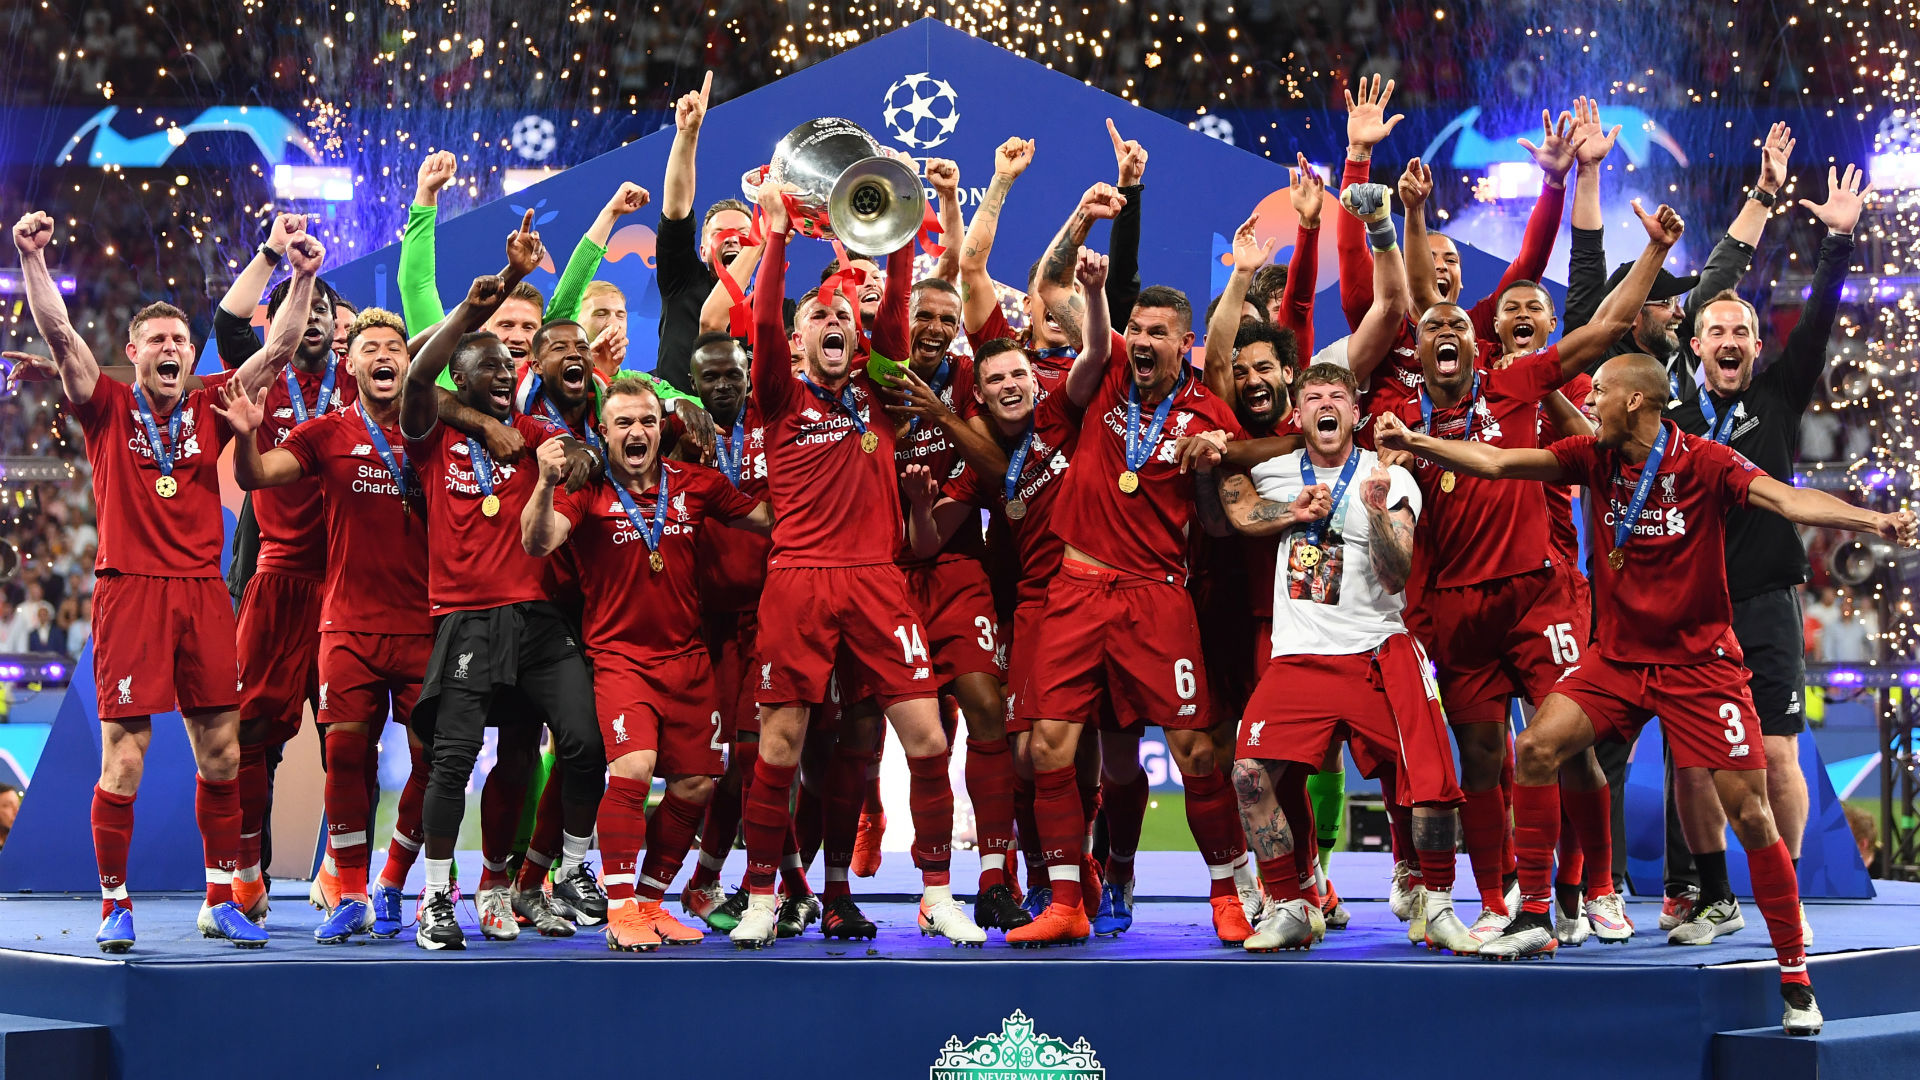 Predictable Champions League Needs Reform - Liverpool Champions League Framed - HD Wallpaper 